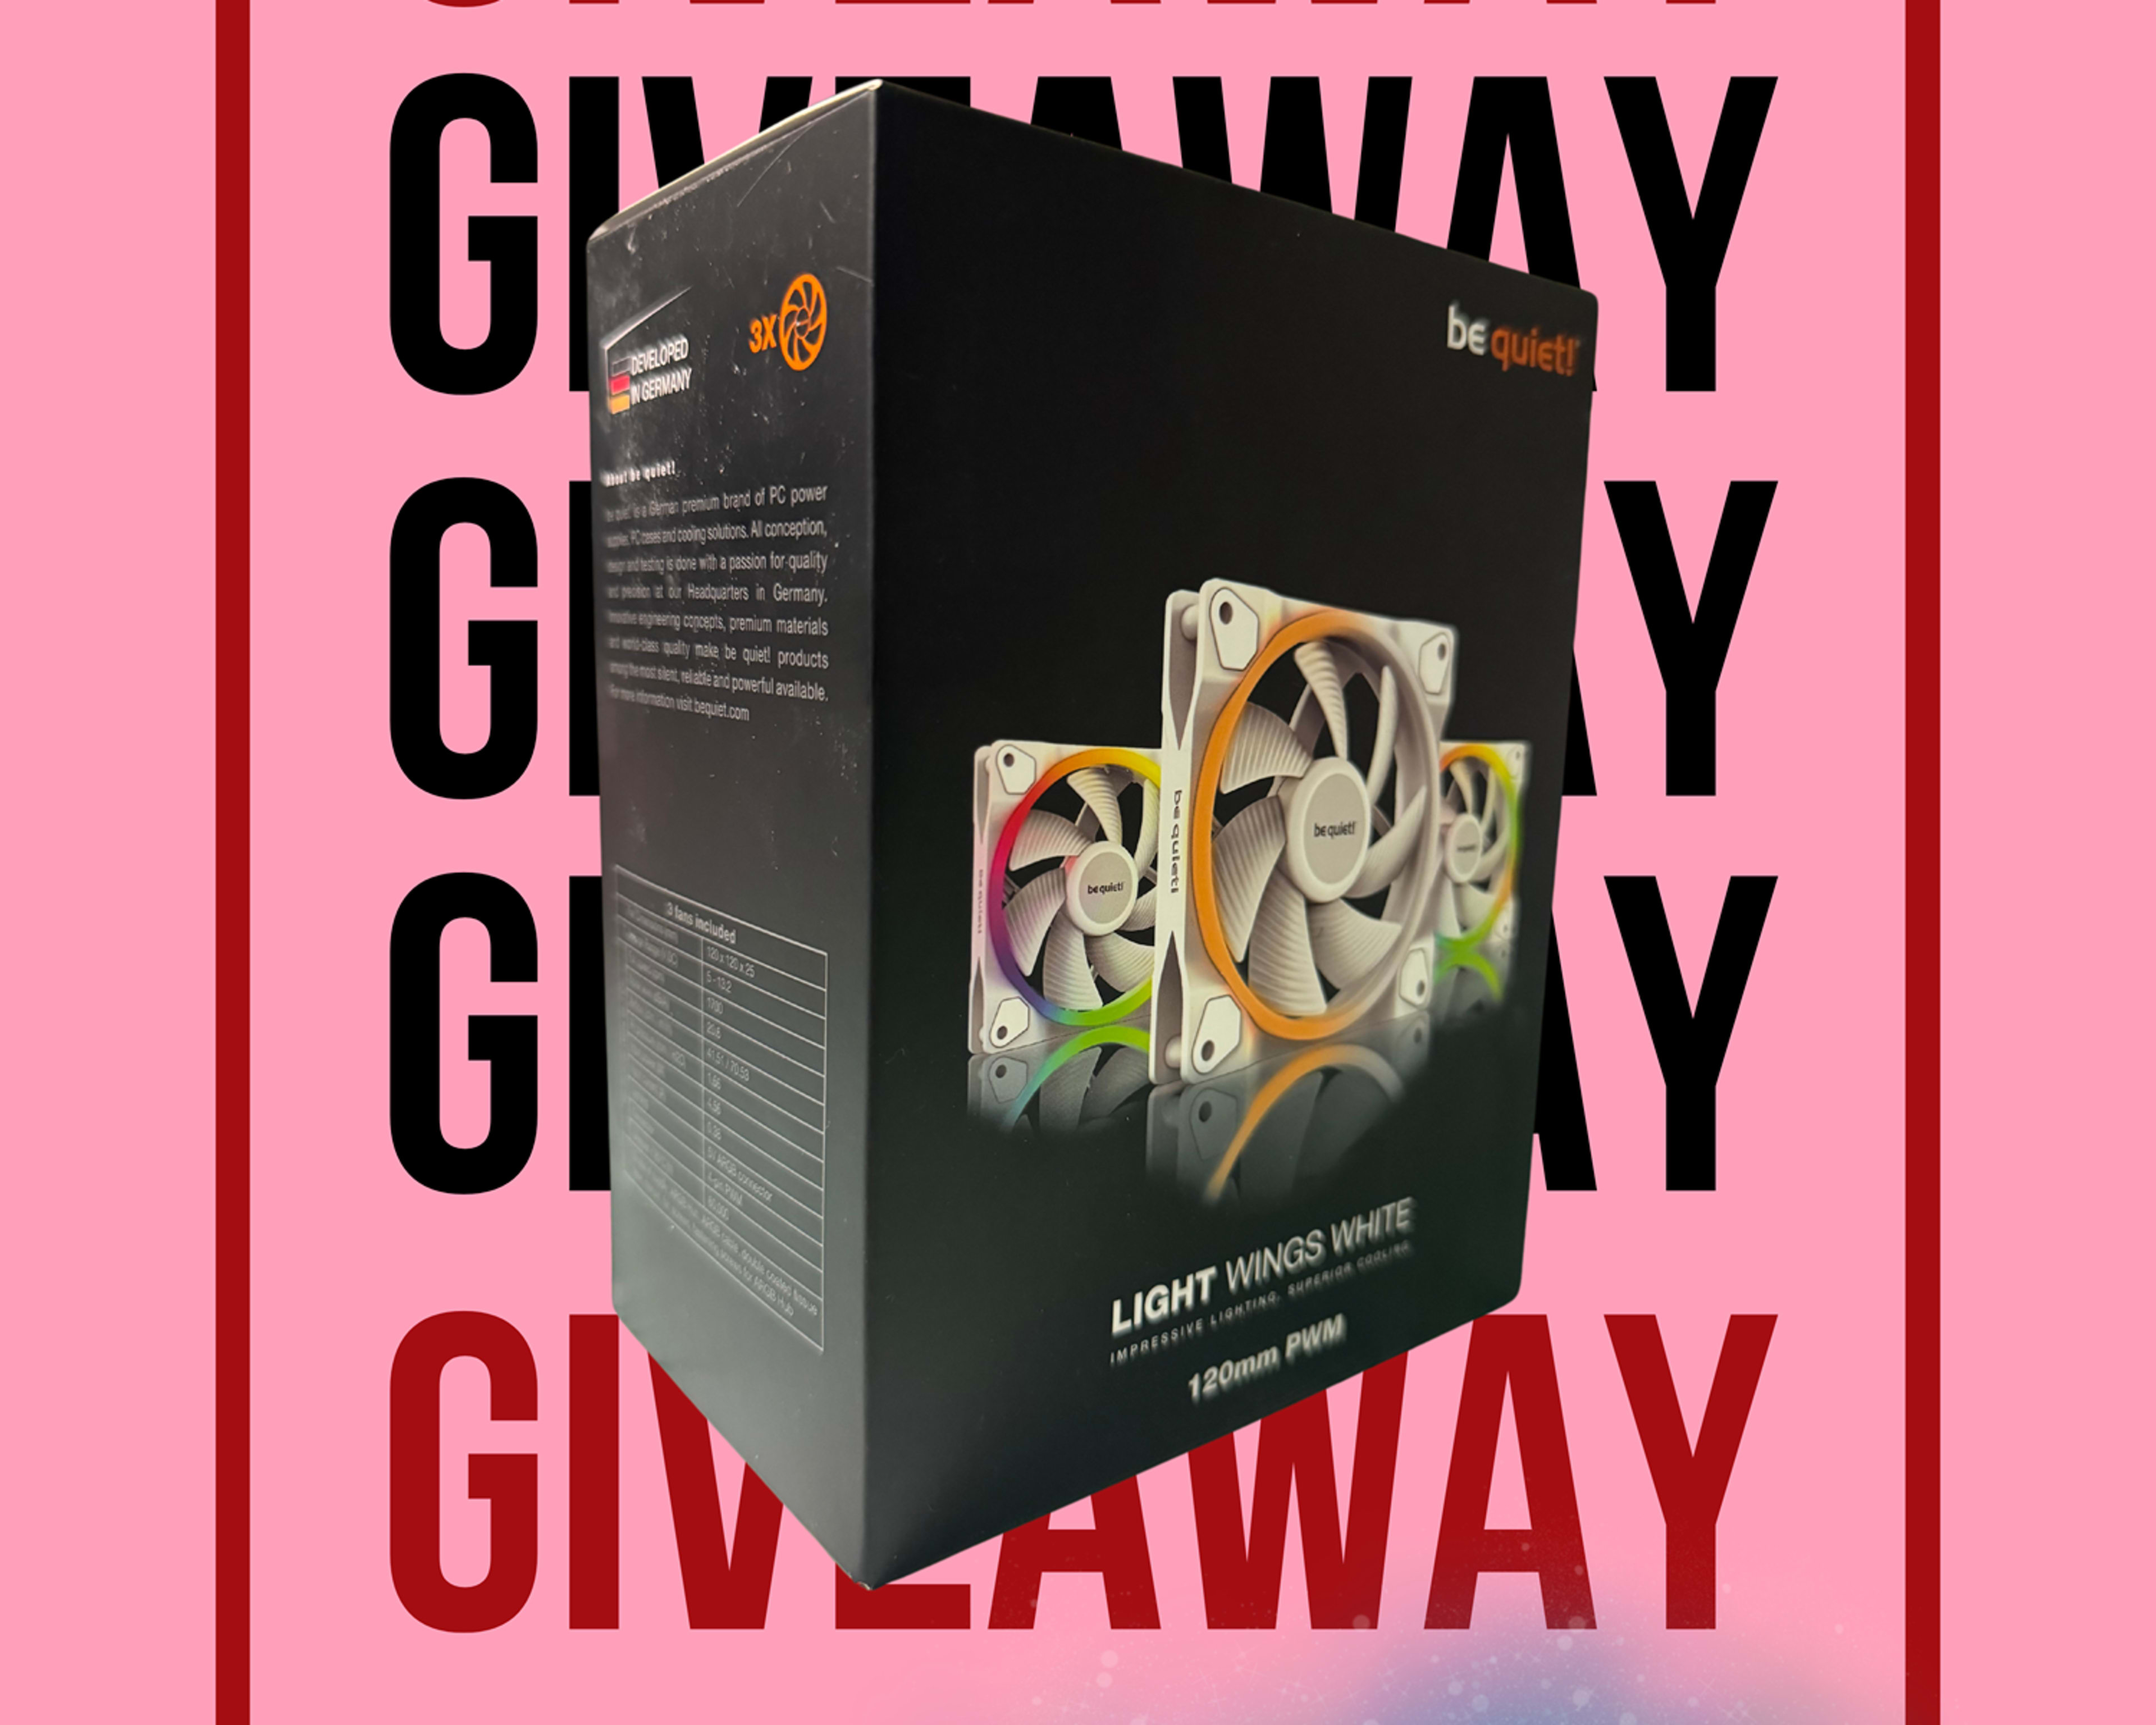 May 2024 Giveaway - Be Quiet! LightWings White Fan Pack